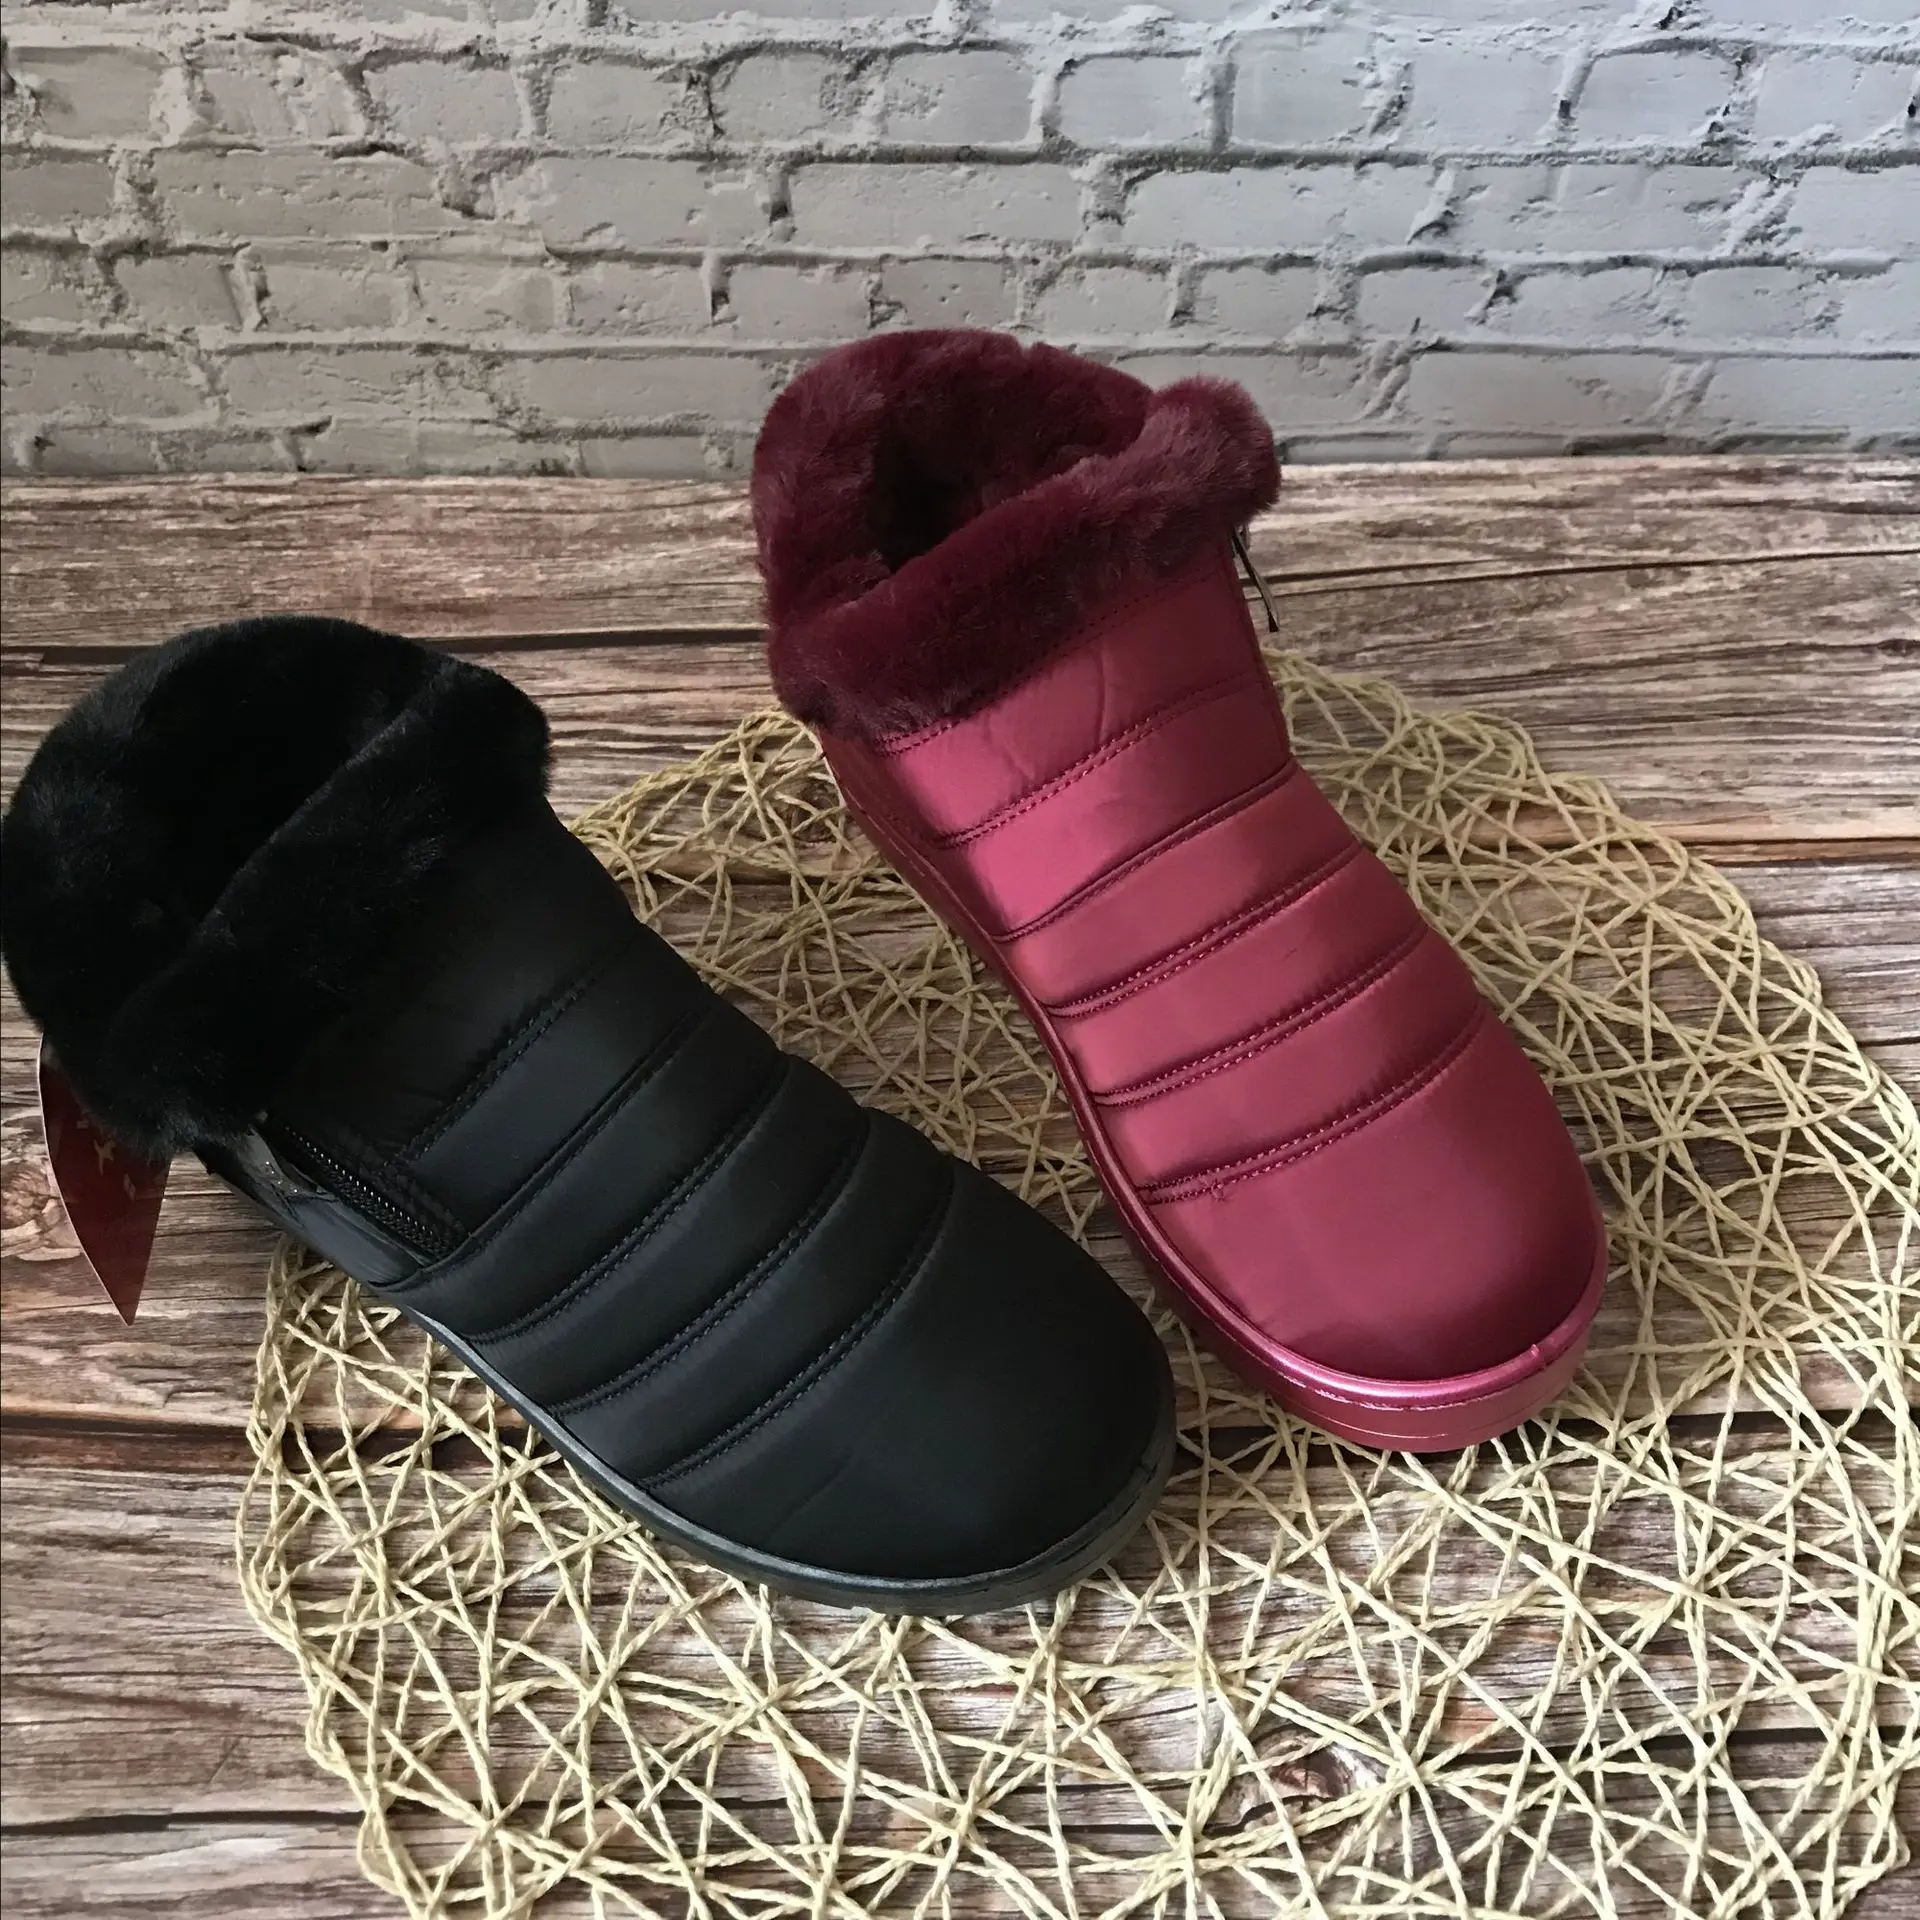 2020 New Women's Comfortable Boots Women's High Quality Woman Fashion Women's Shoes Round Toe Boots